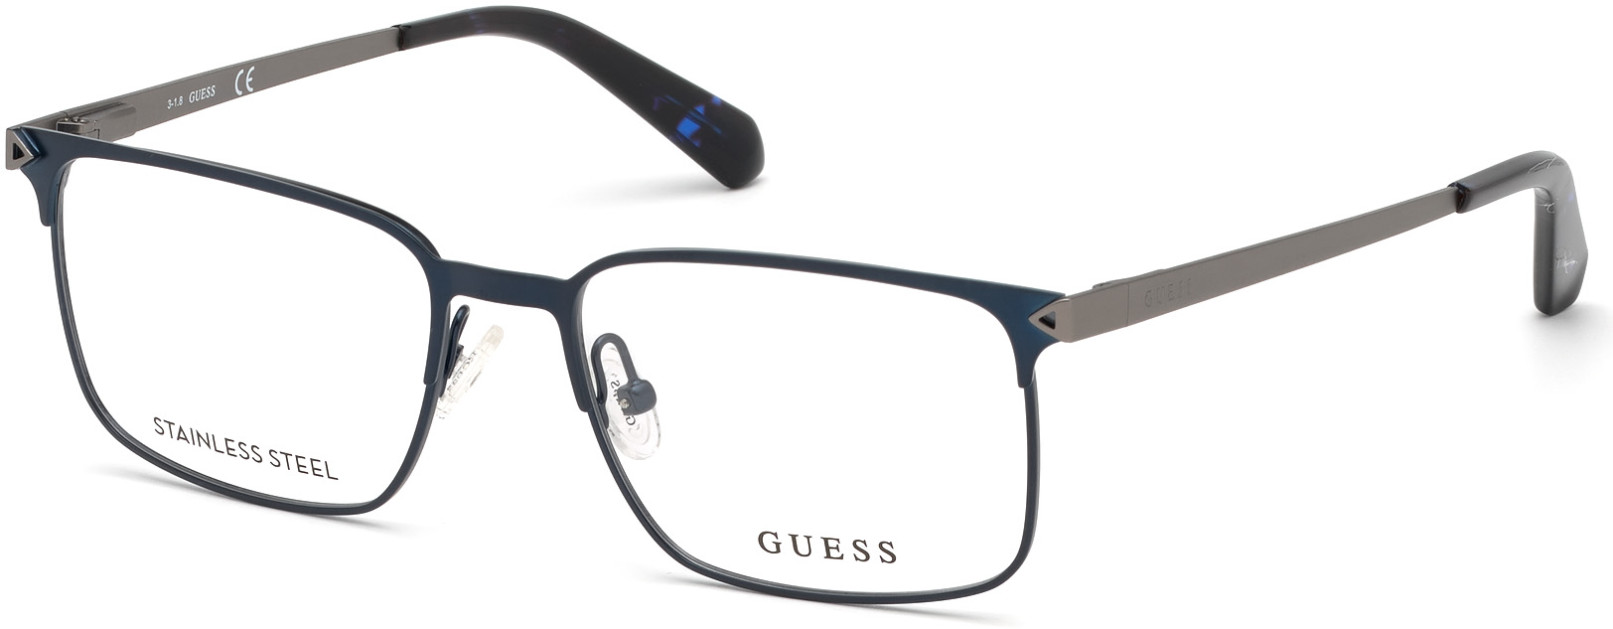 GUESS 1965 092